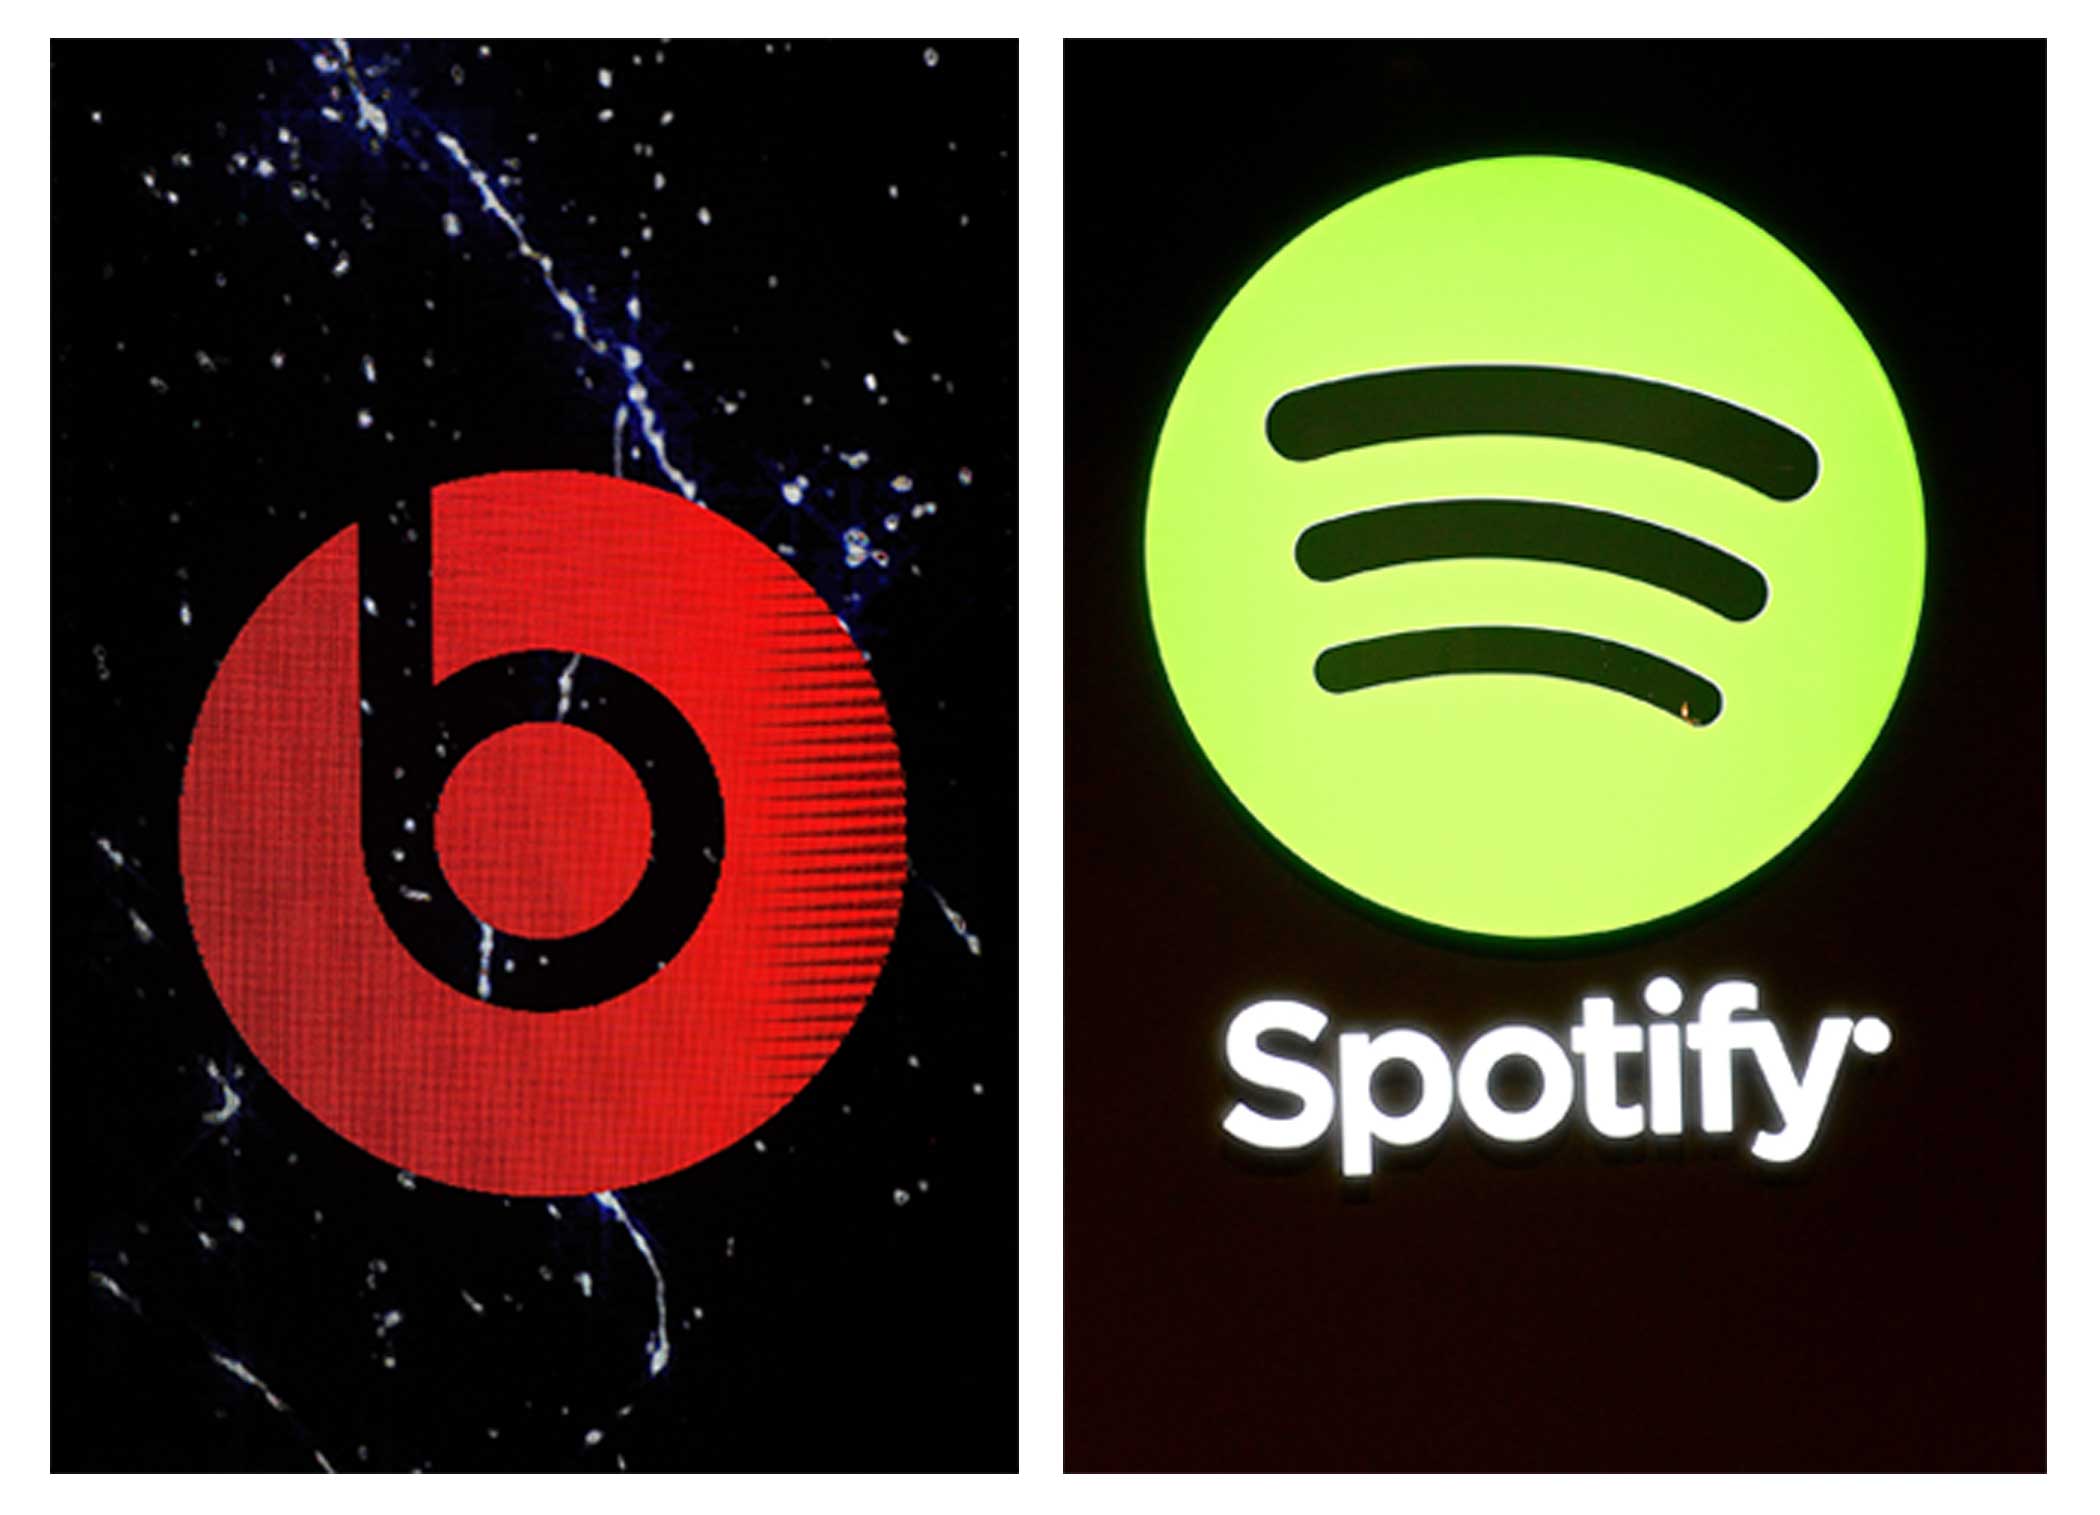 Beats and Spotify logos (Emmanuel Dunand, Ethan Miller—Getty Images)